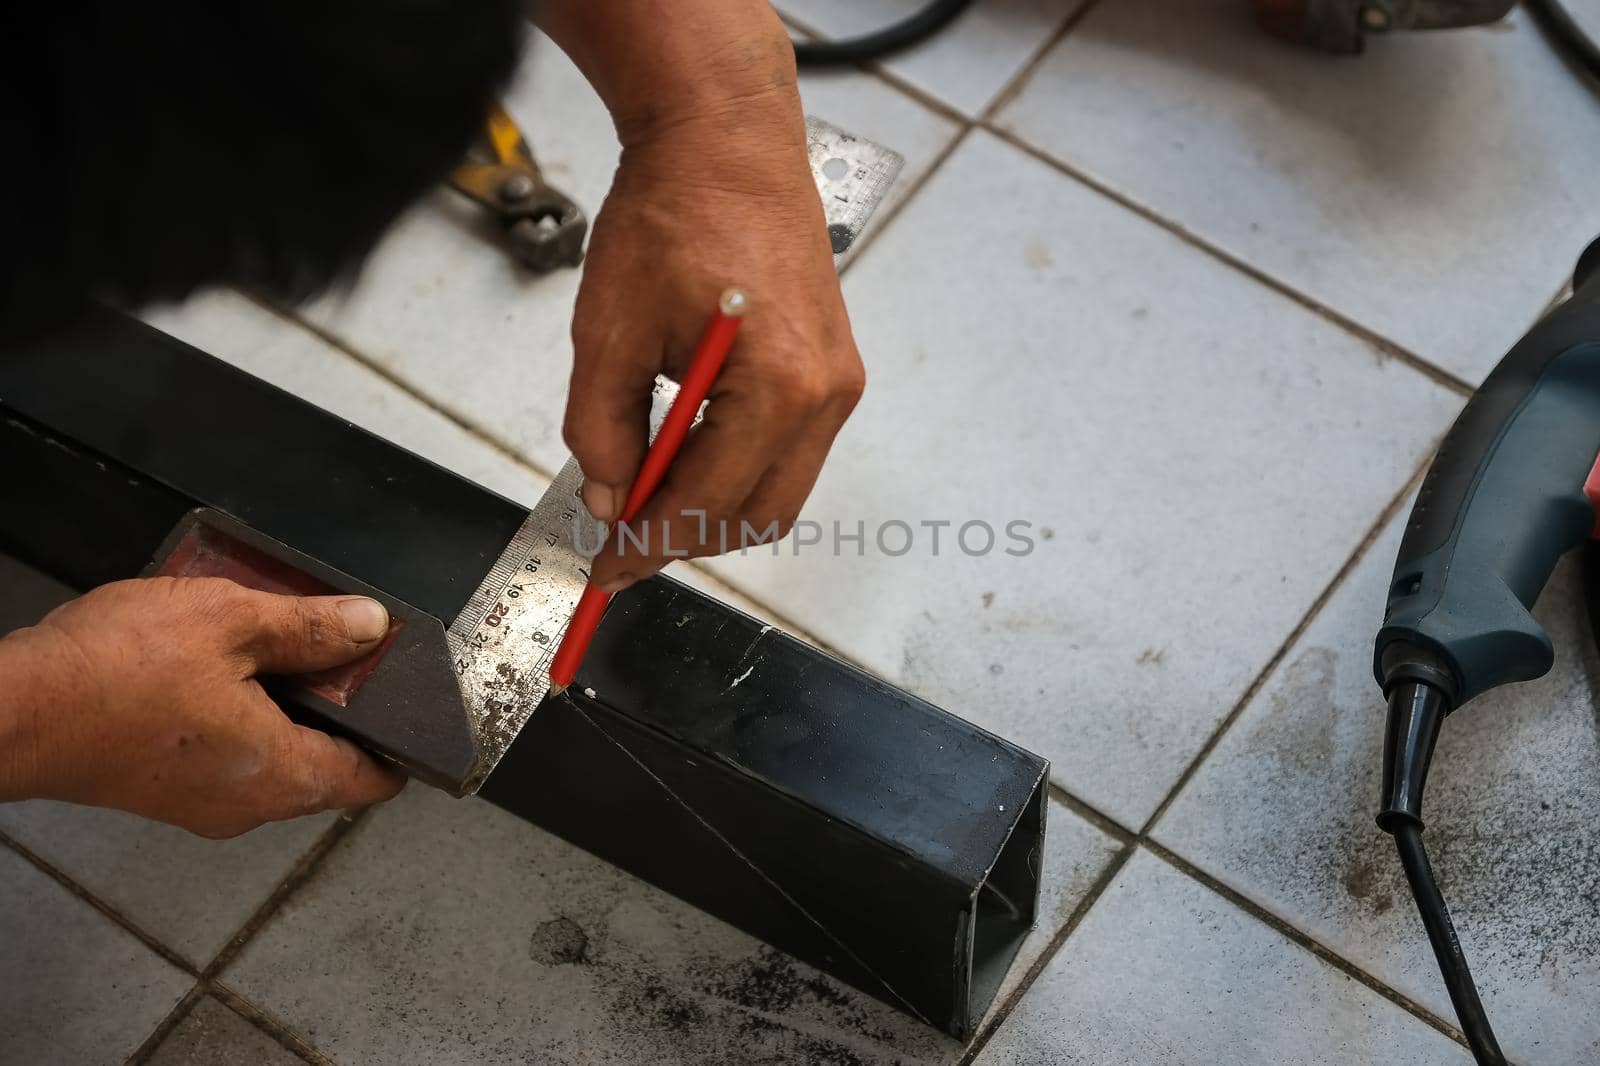 The technician is using a ruler to measure right angles and then use a pencil to mark the precision in cutting steel. by Manastrong